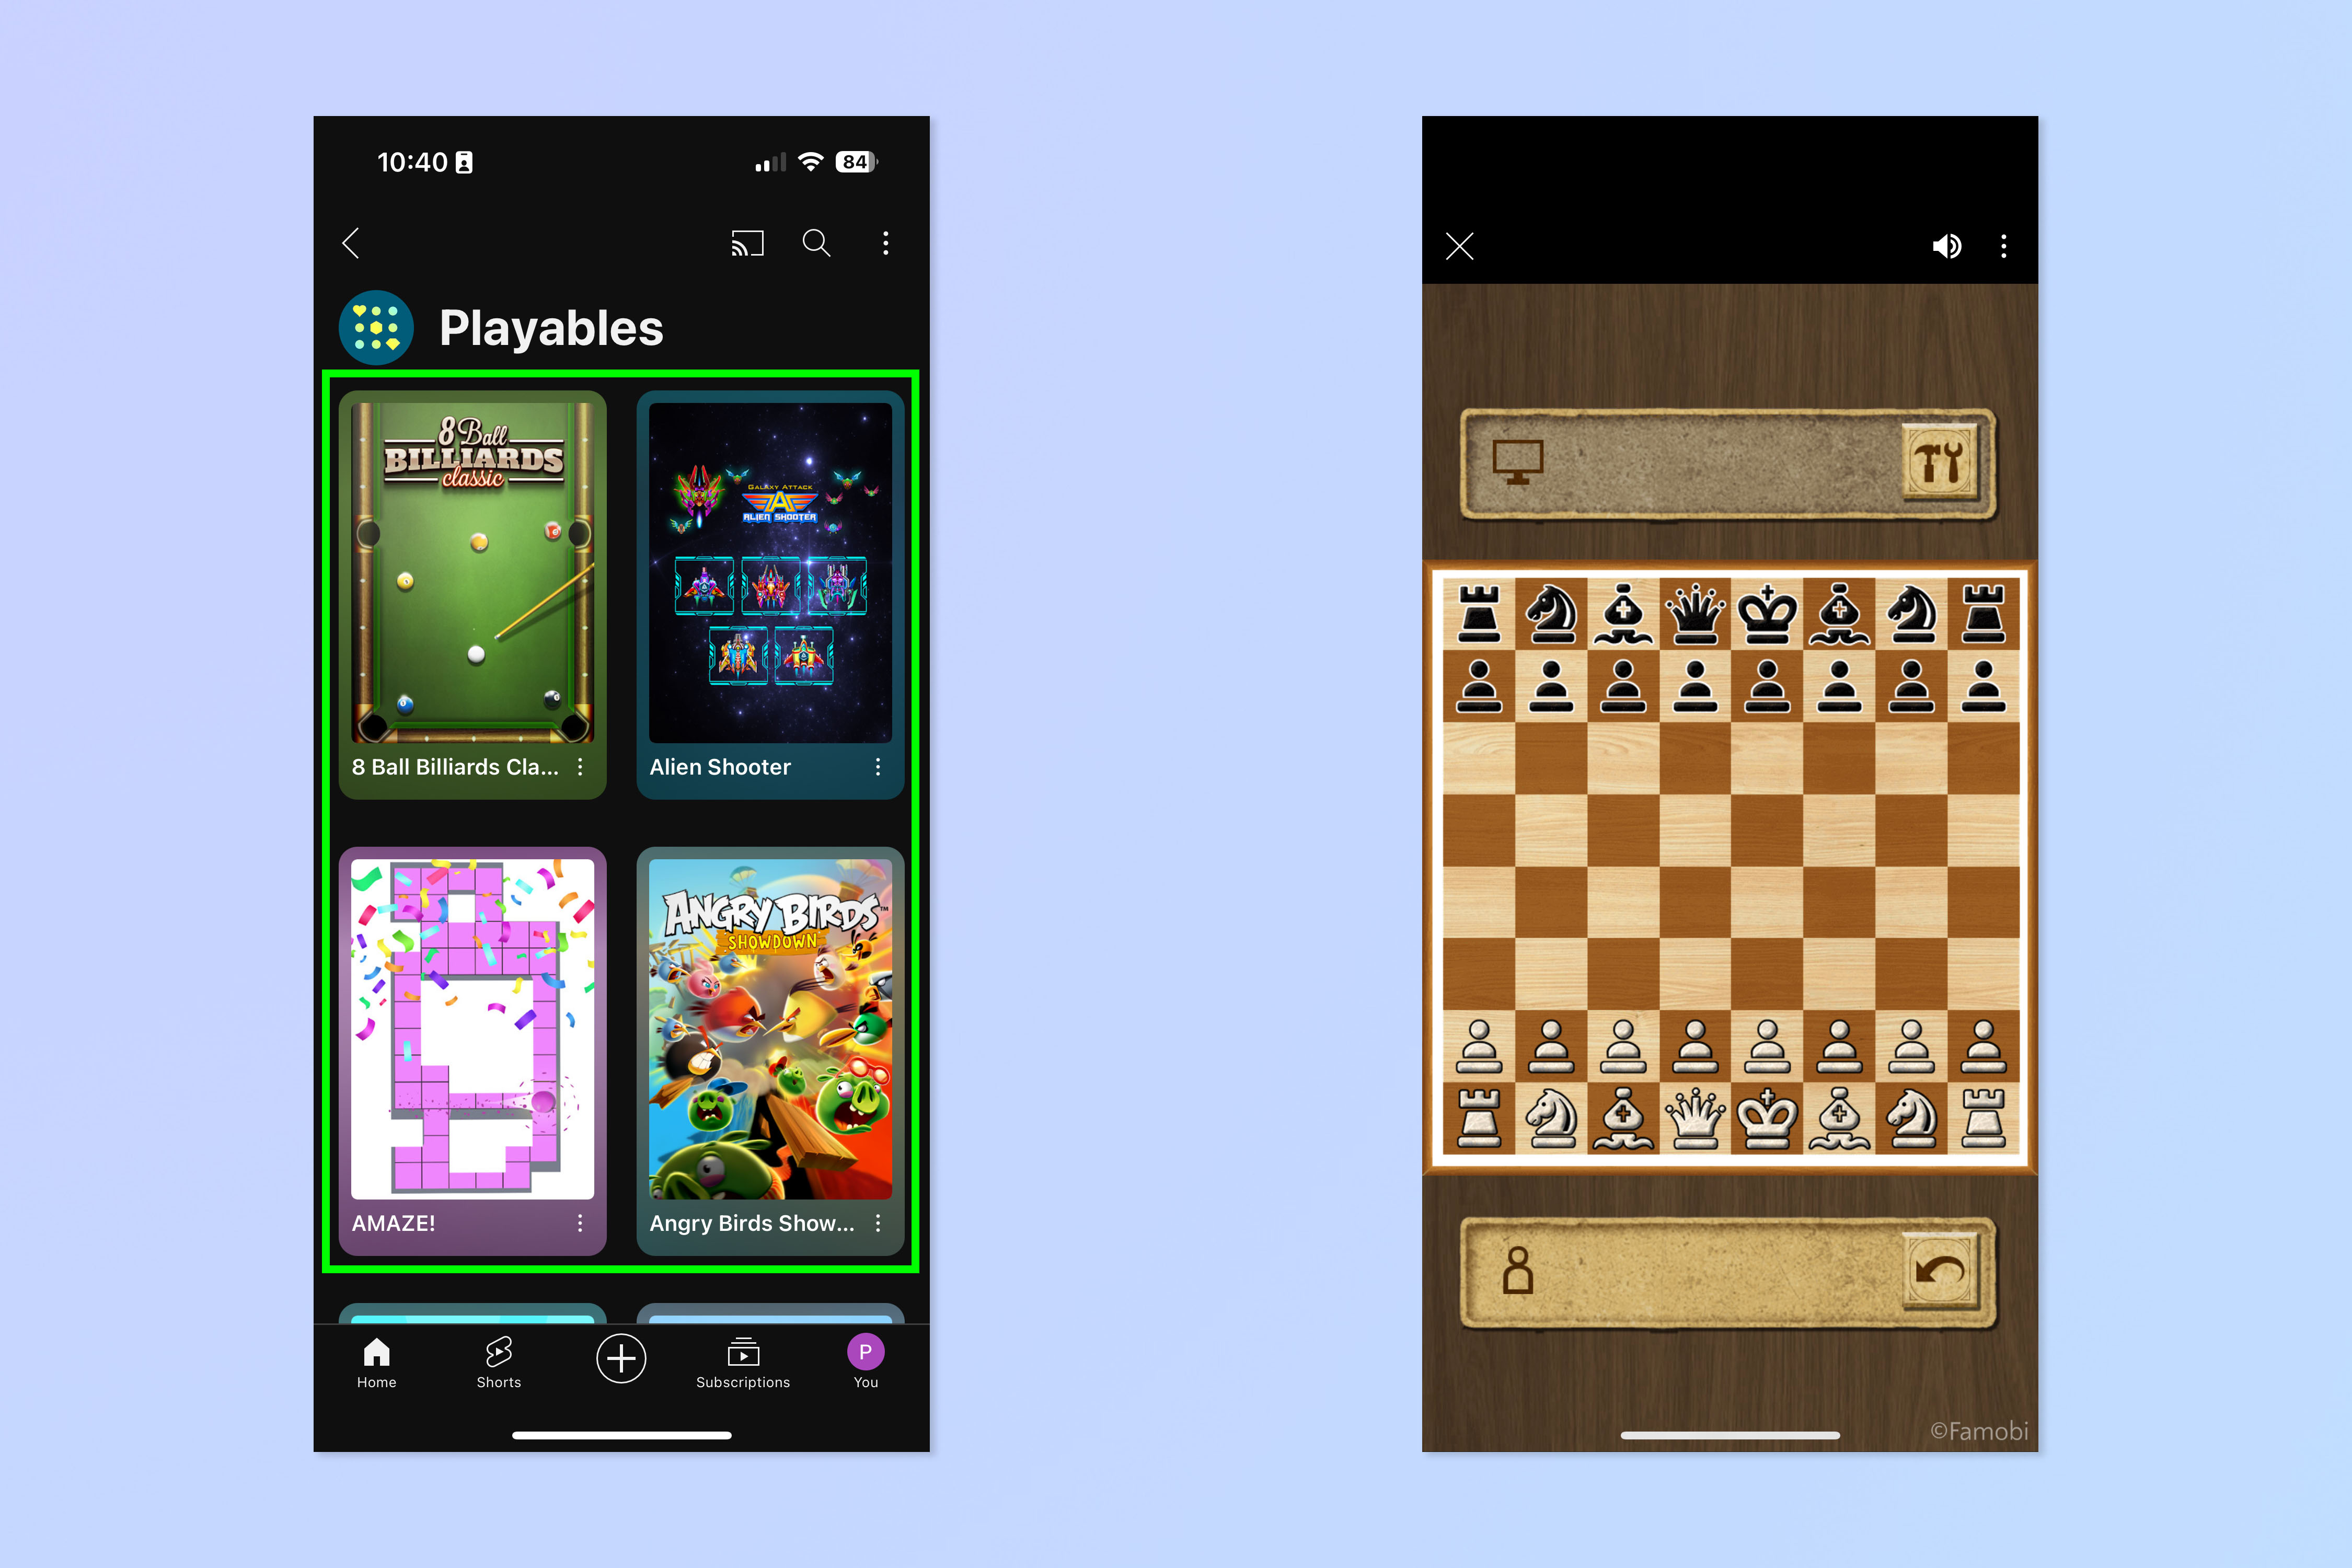 A screenshot showing how to play games on YouTube mobile app